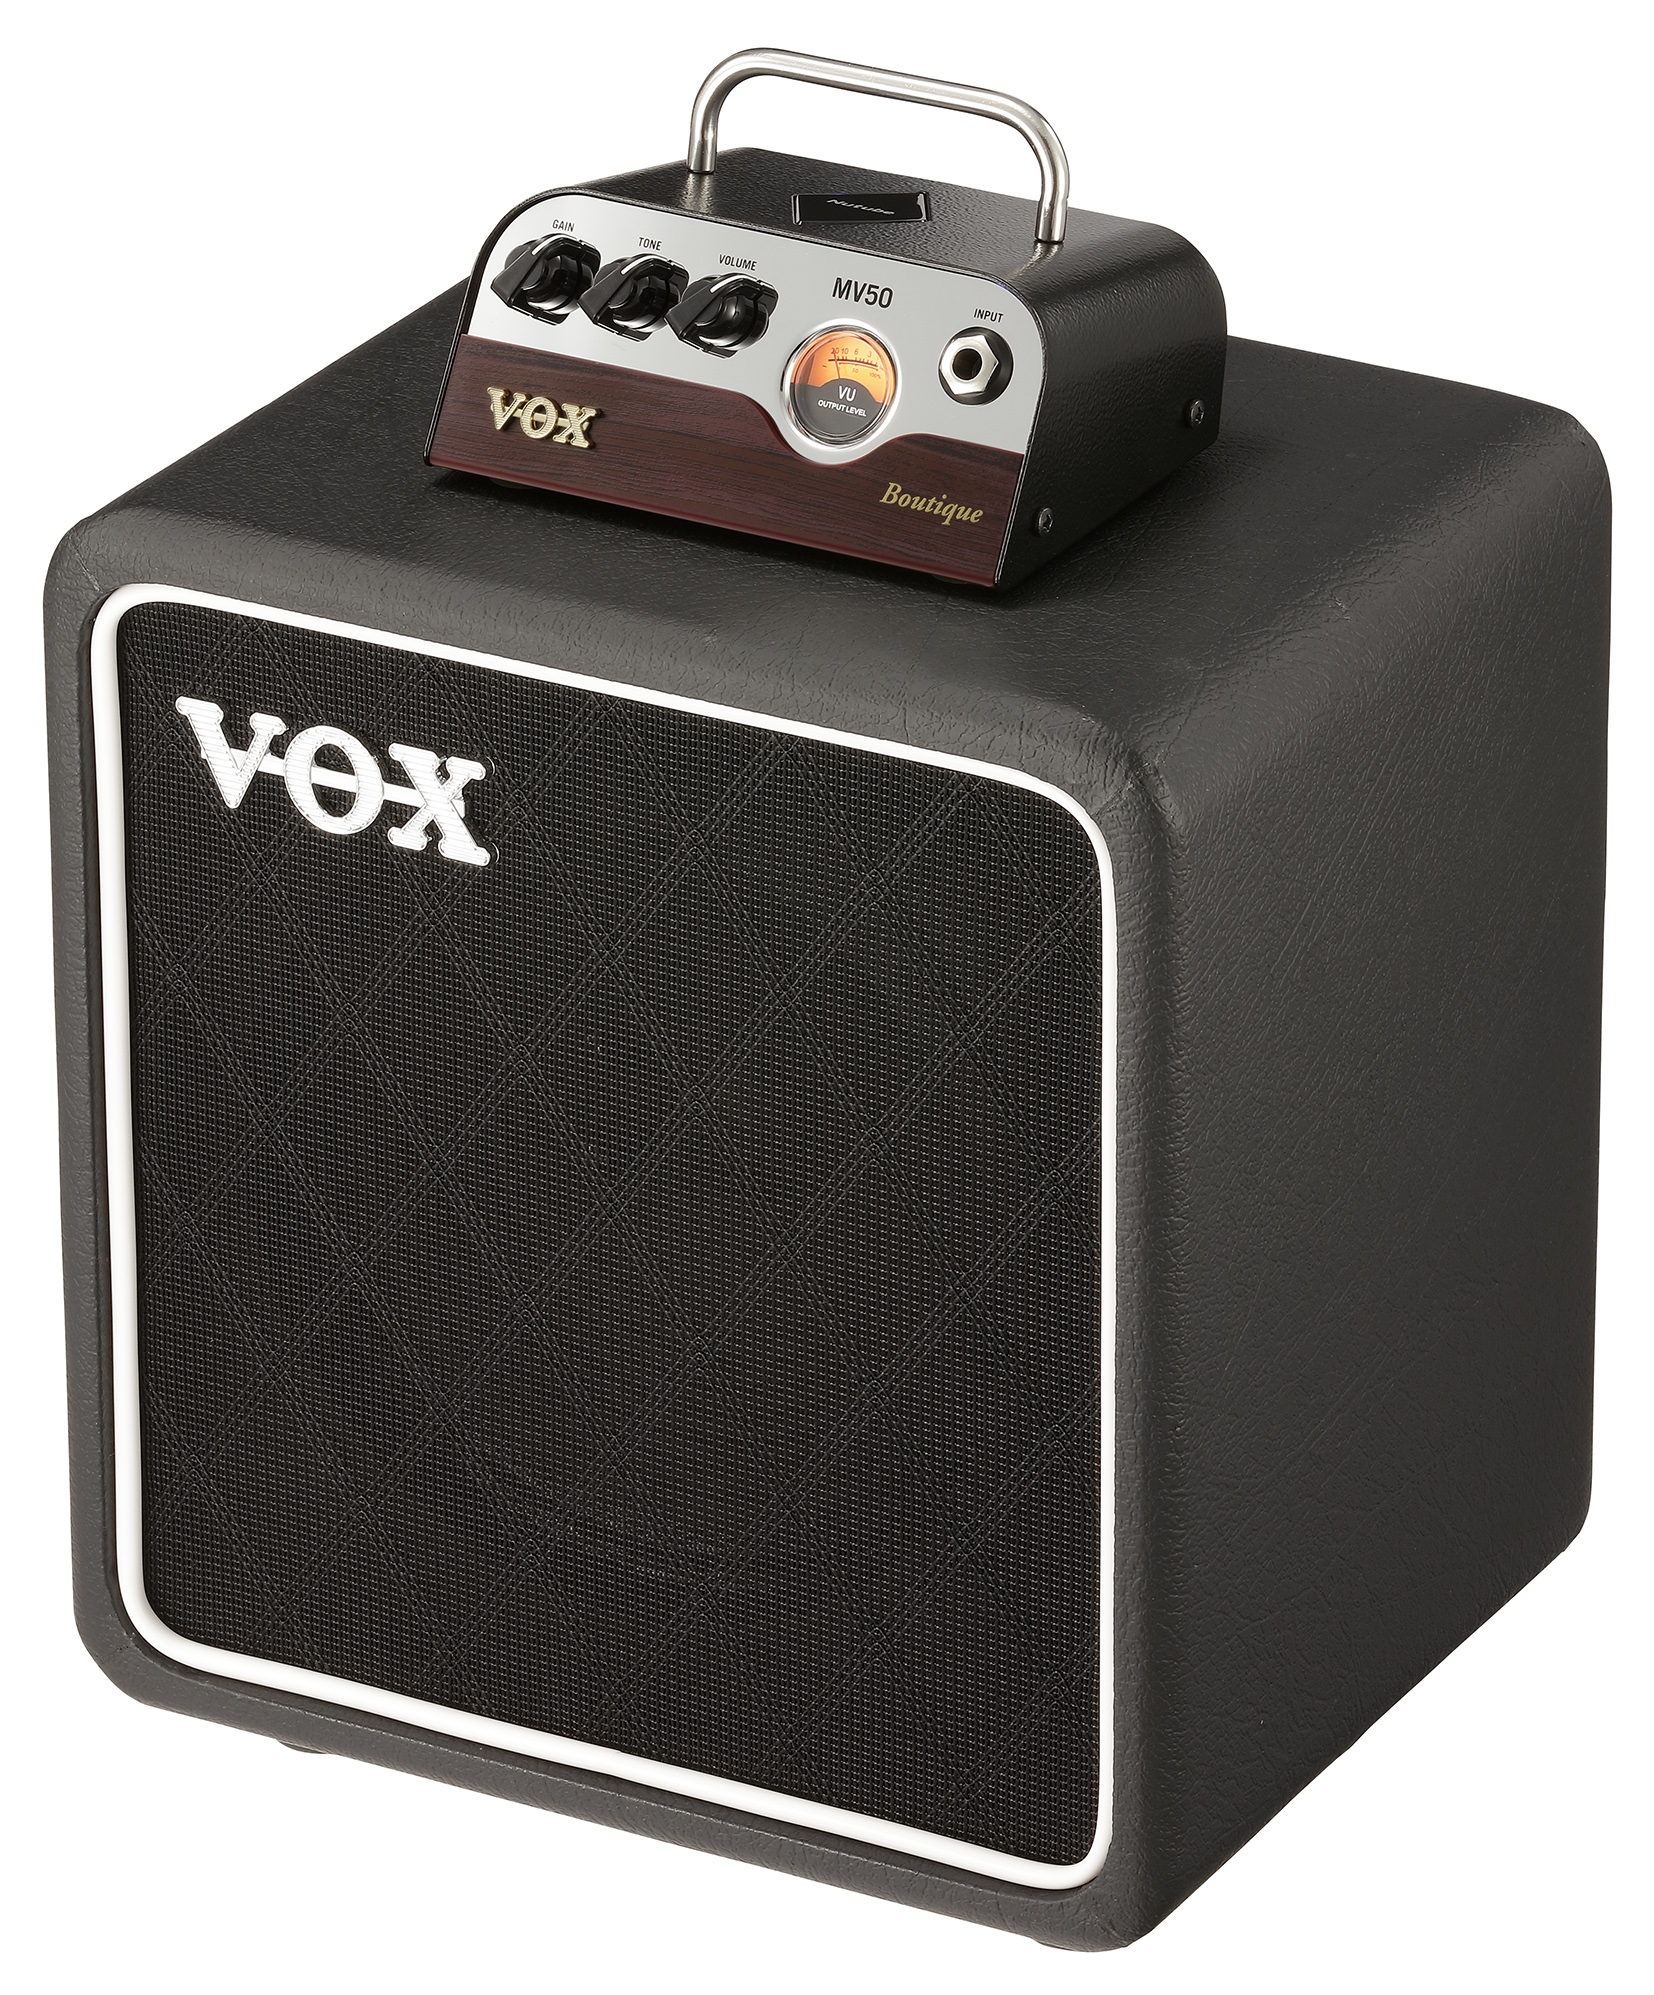 VOX Adds Two New Models to MV50 Series « MMR Magazine – Musical